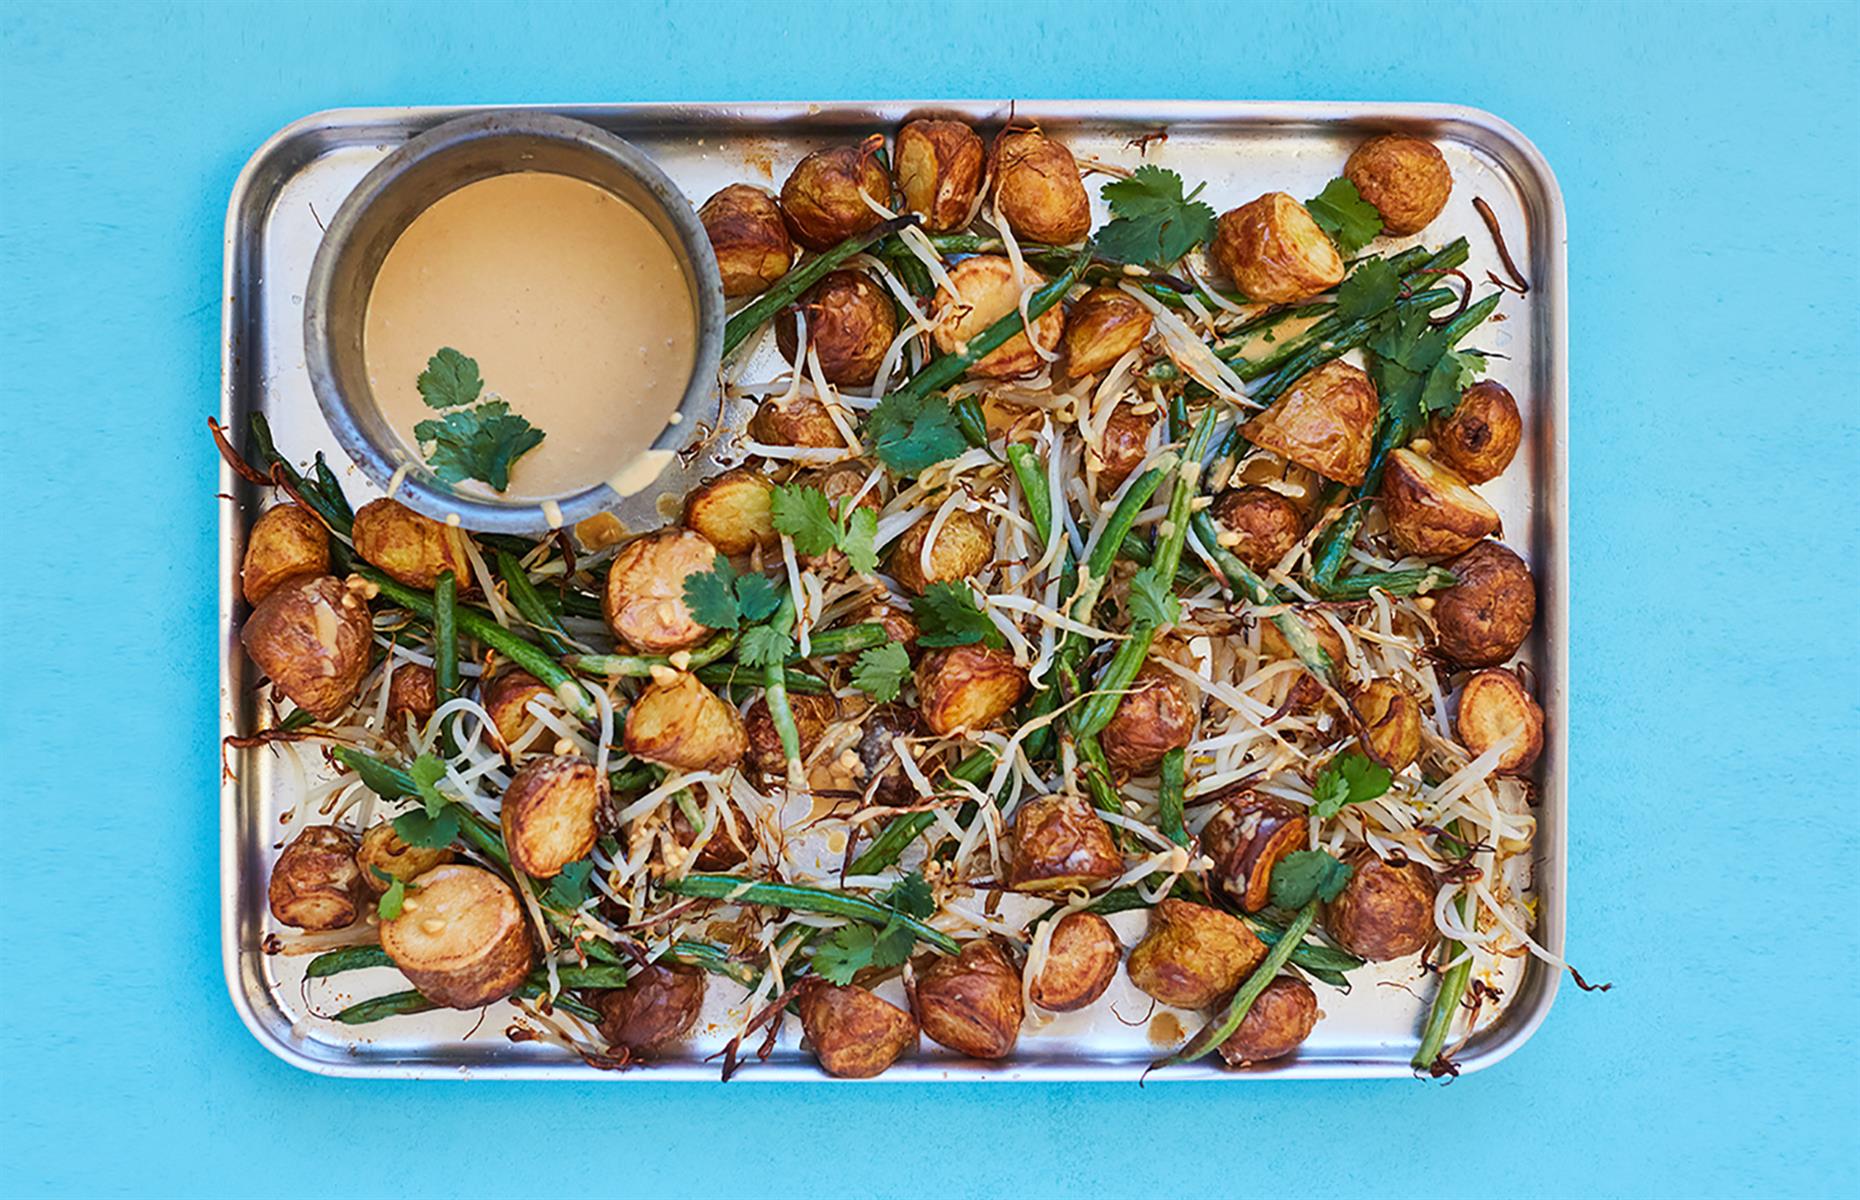 30 recipes to jazz up your potatoes